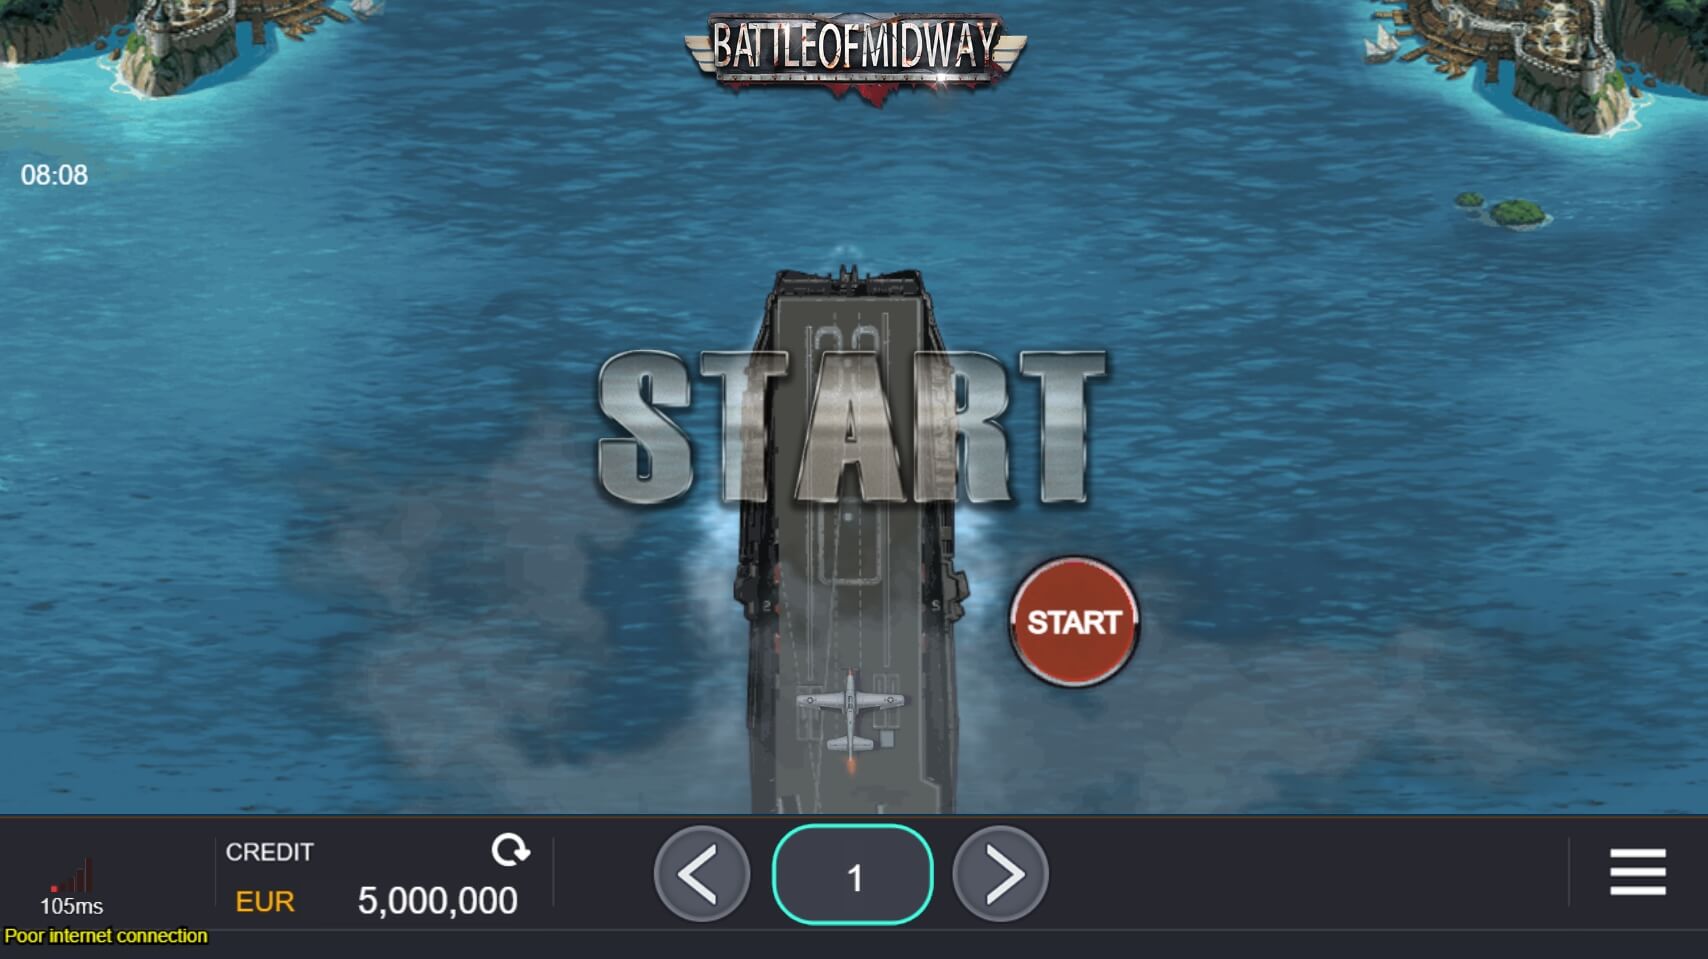 Battle of Midway Gioco Plus superslot เครดิตฟรี 50